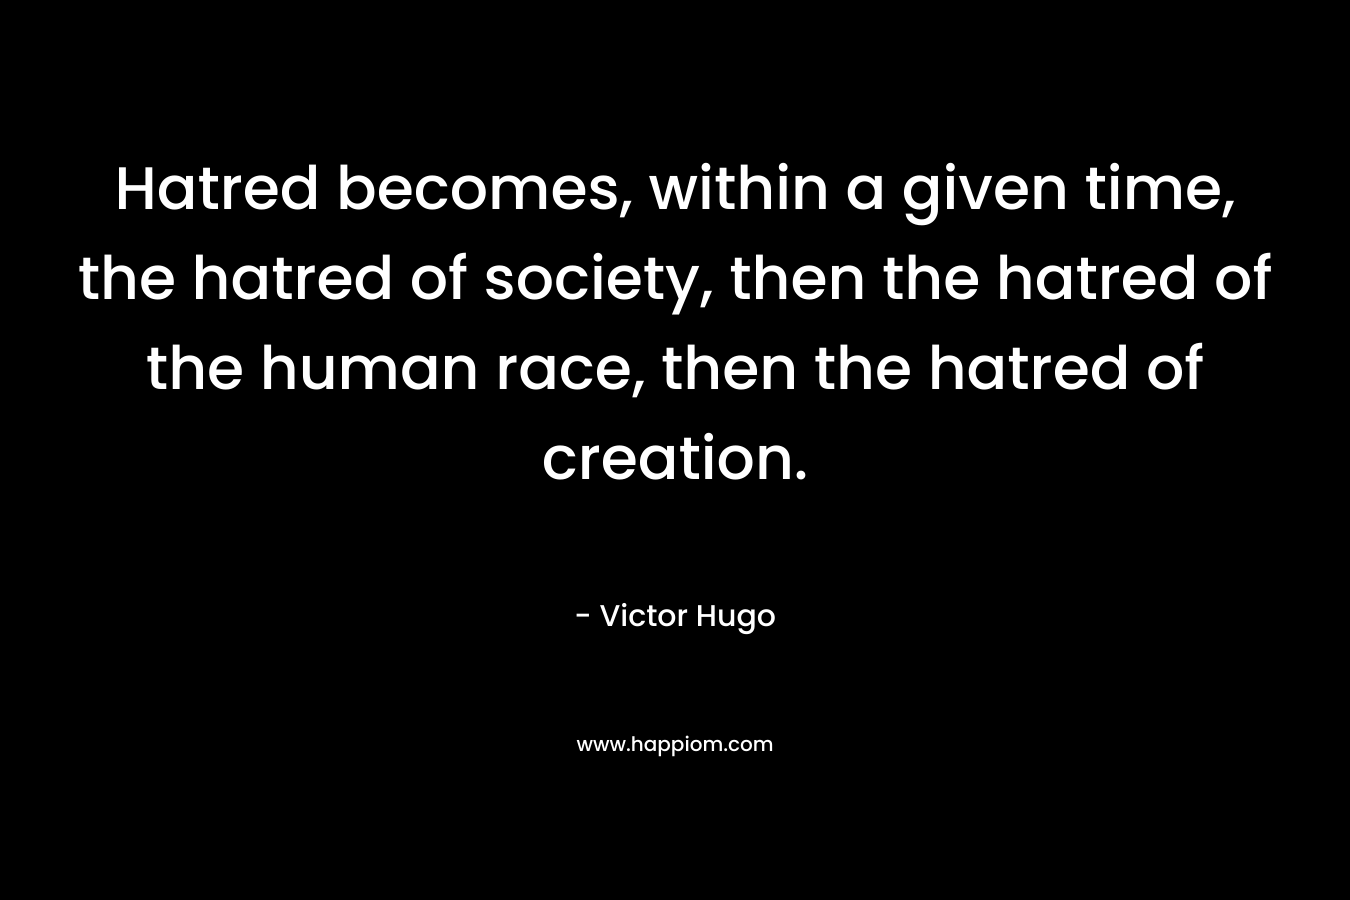 Hatred becomes, within a given time, the hatred of society, then the hatred of the human race, then the hatred of creation.